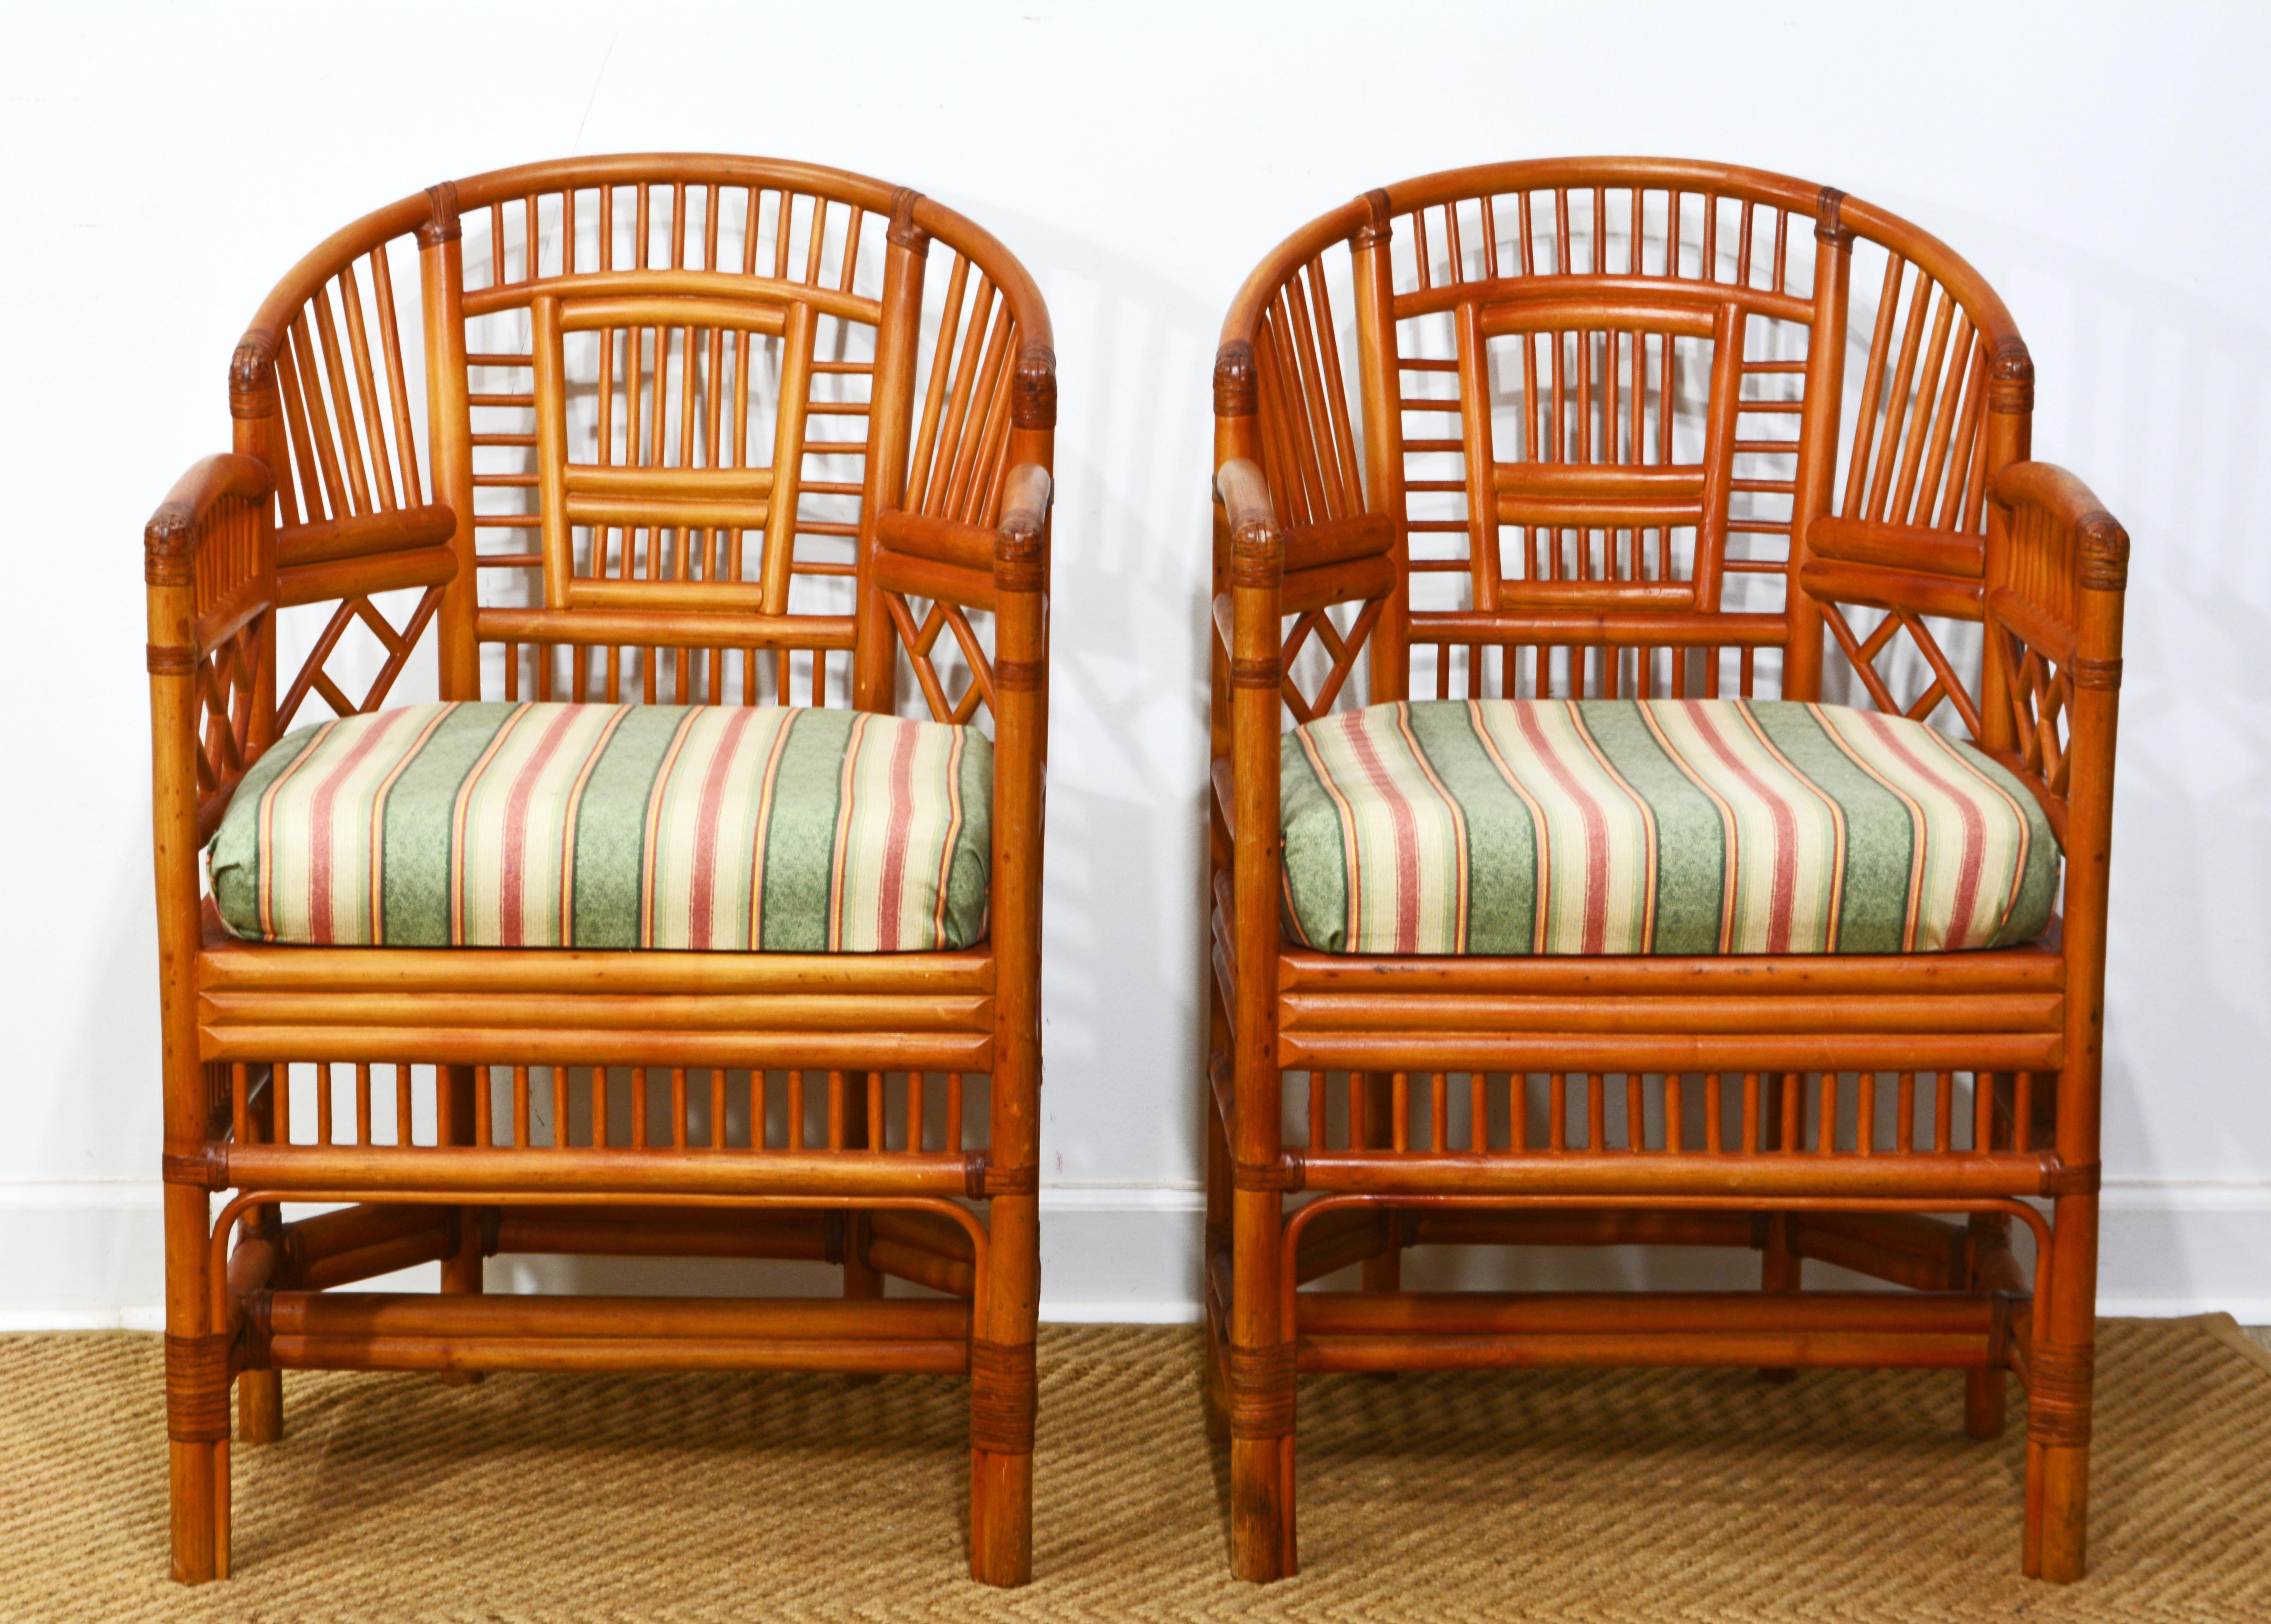 This pair of Chinoiserie Chippendale horse shoe back rattan and cane chairs often named Brighton Pavillion style chairs have an iconic quality and the model can be found with a variation of designs and materials. These chairs are very well